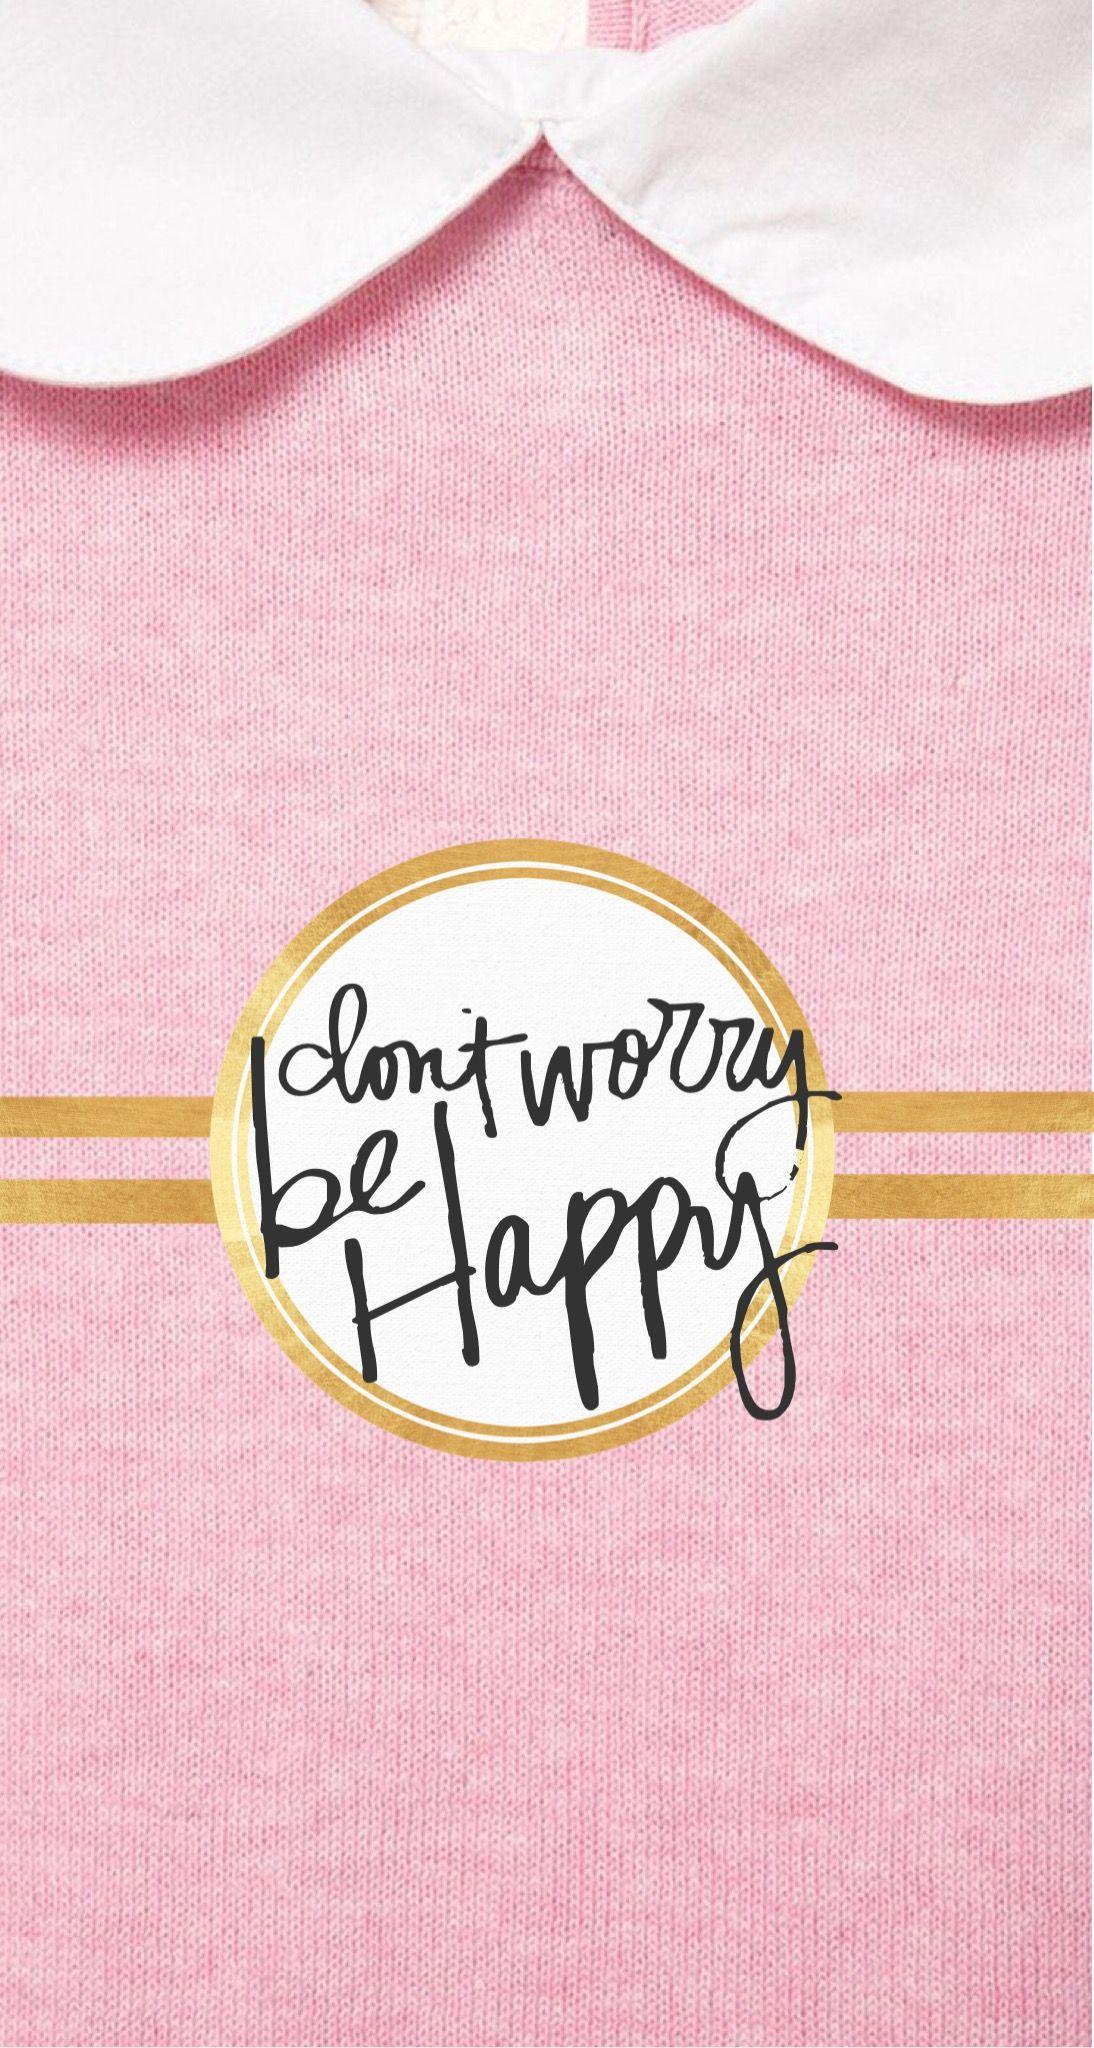 Don't worry be happy Find more Super Cute wallpaper